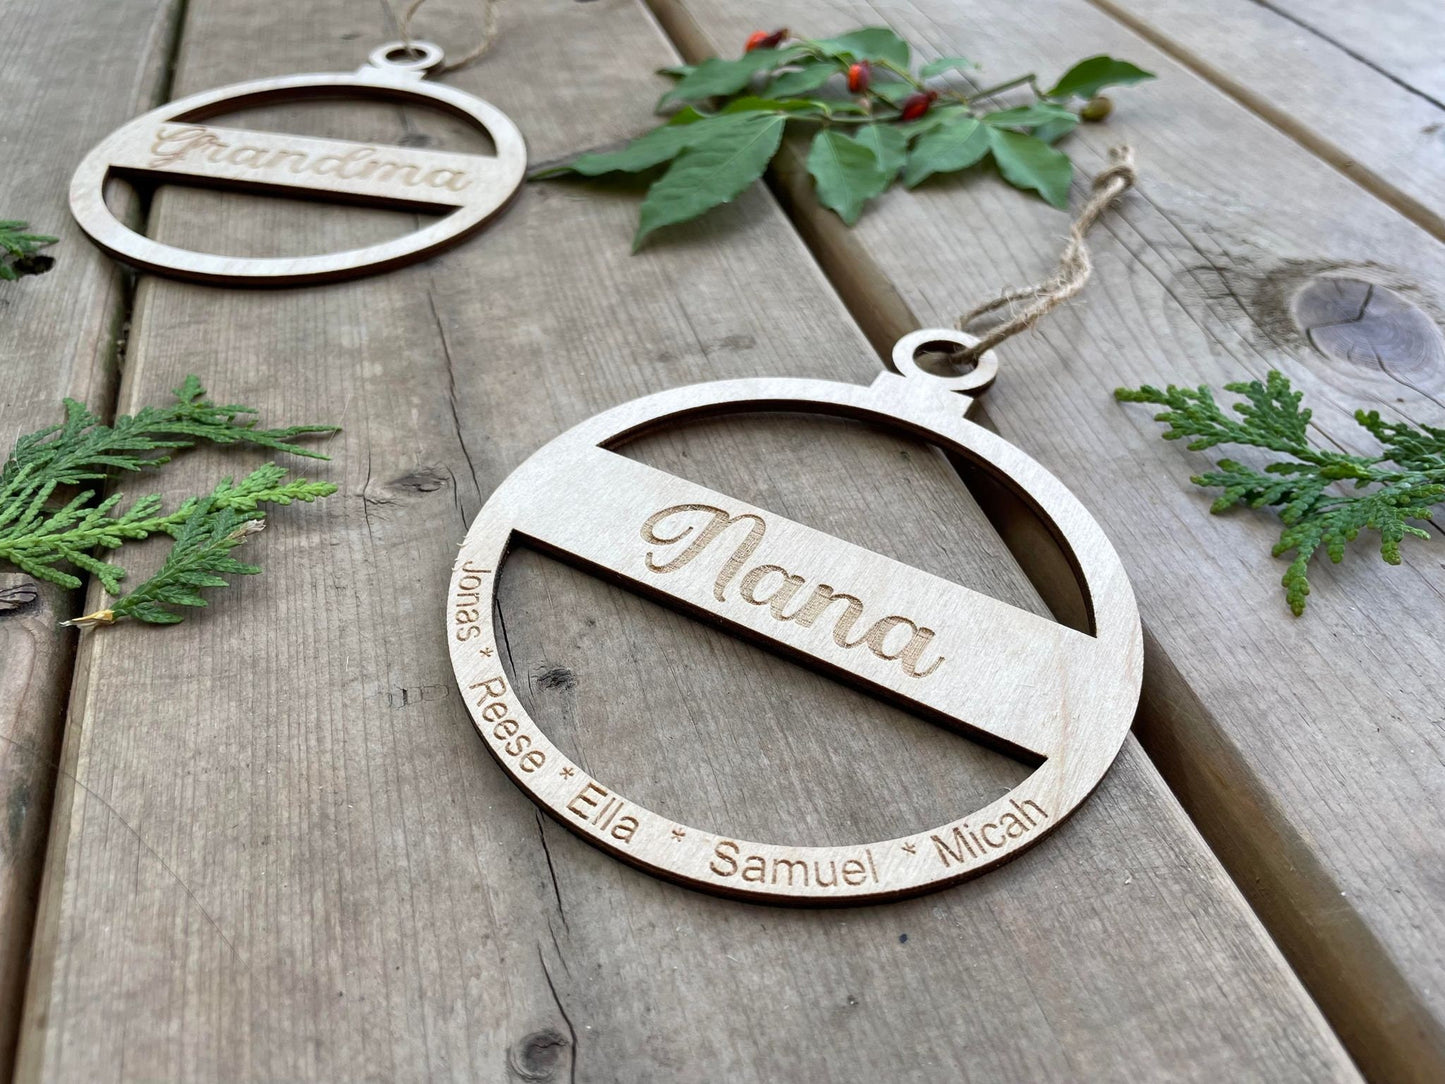 Personalized Name Ornament